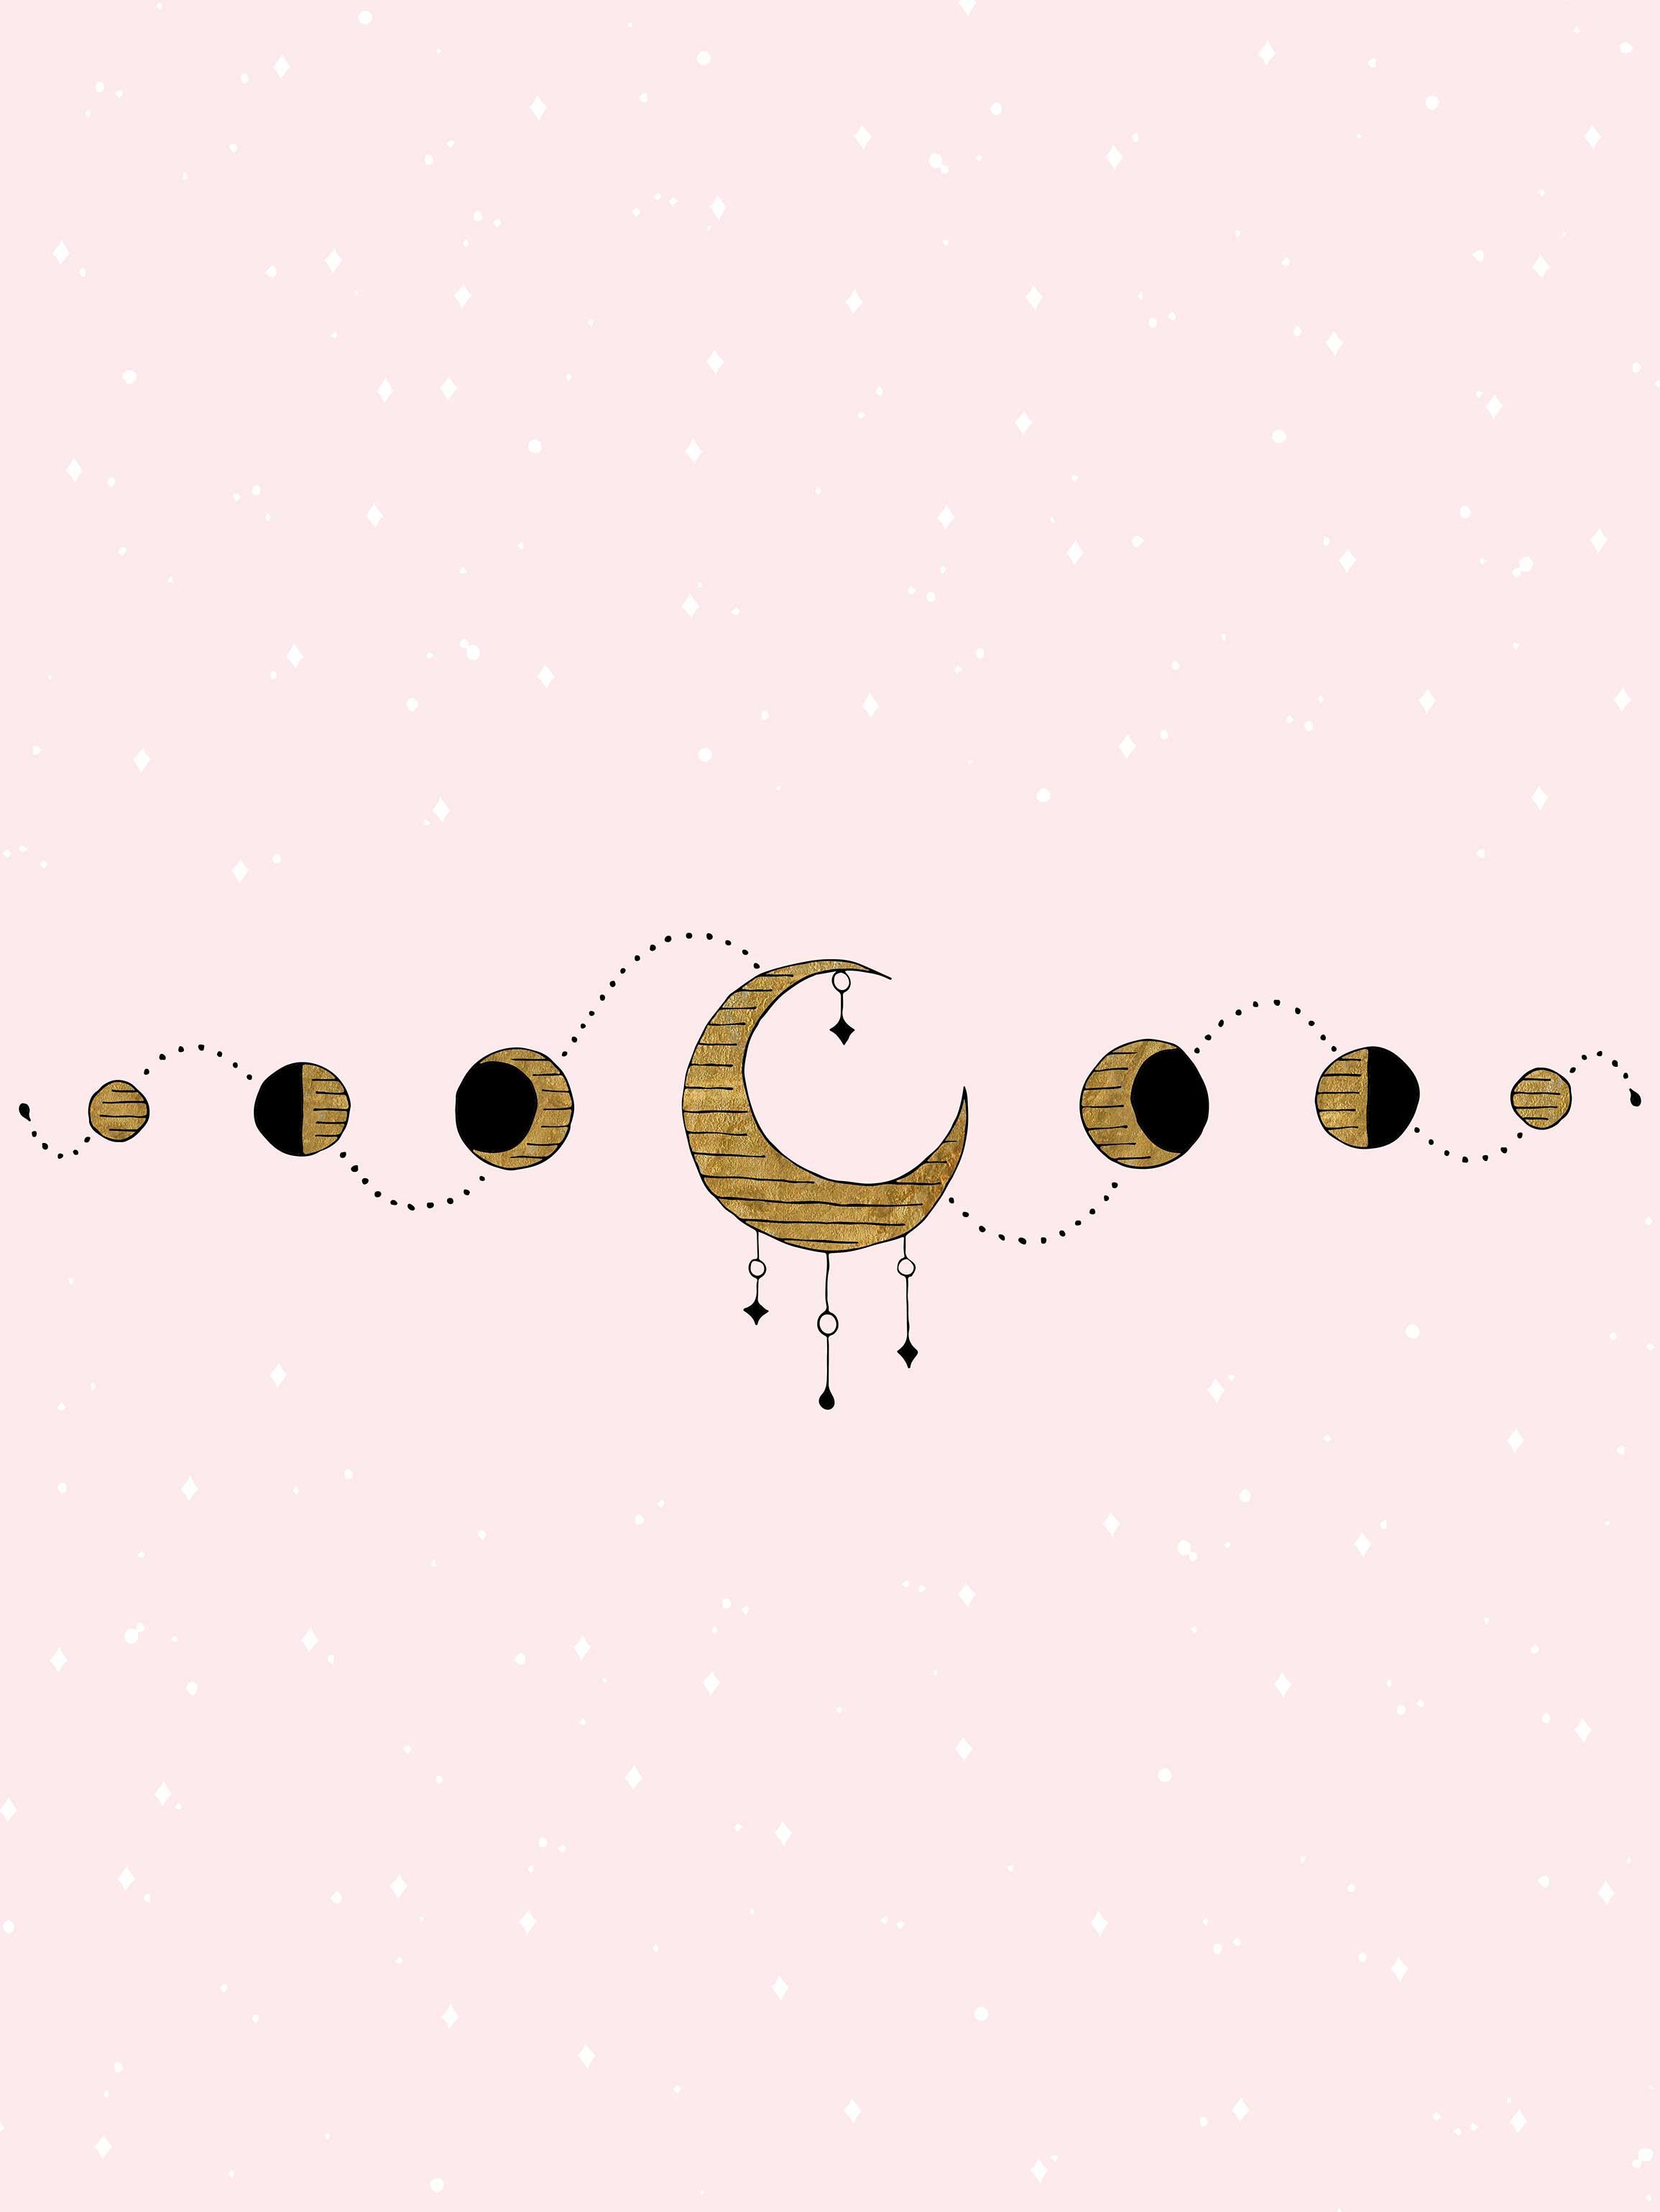 Moon phase desktop and phone wallpaper. Witch wallpaper, Kawaii wallpaper, Phone wallpaper